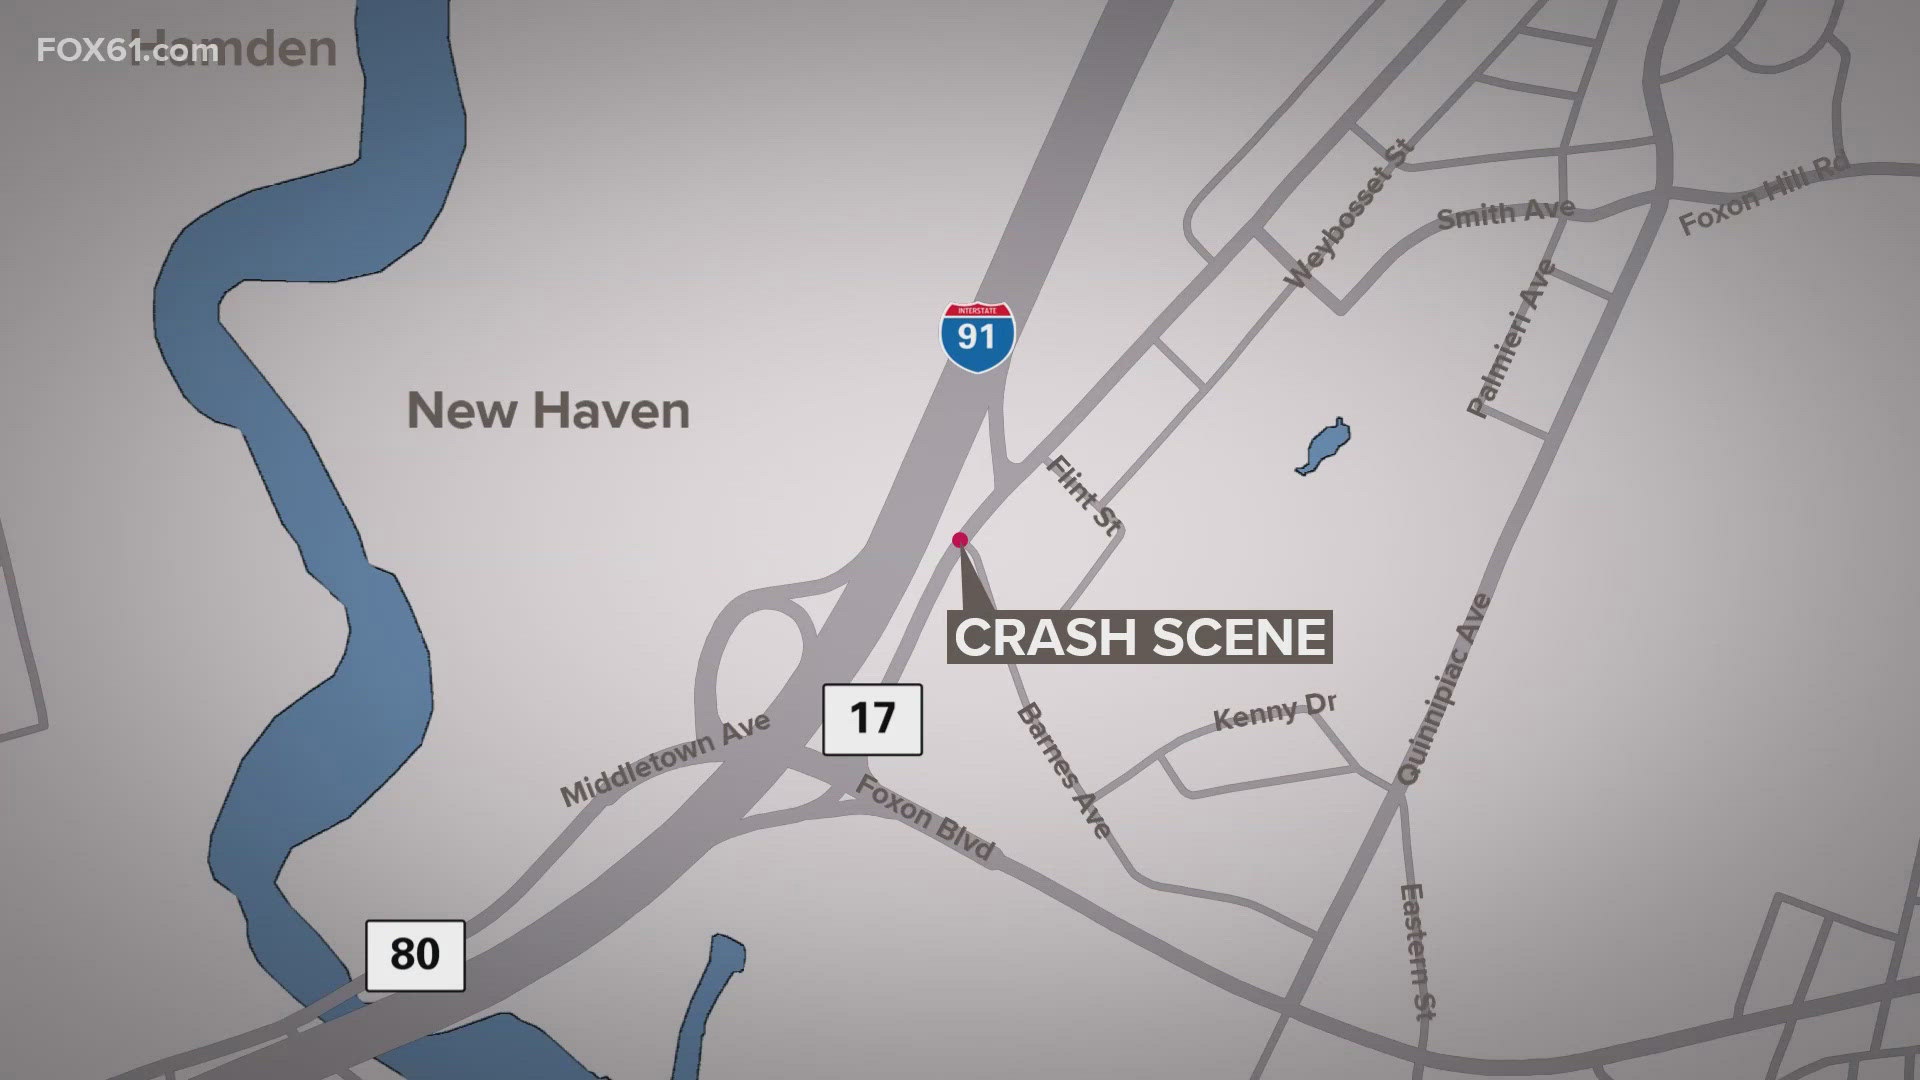 Two people were killed during a three-car crash on Middletown Avenue early Saturday morning, according to police.